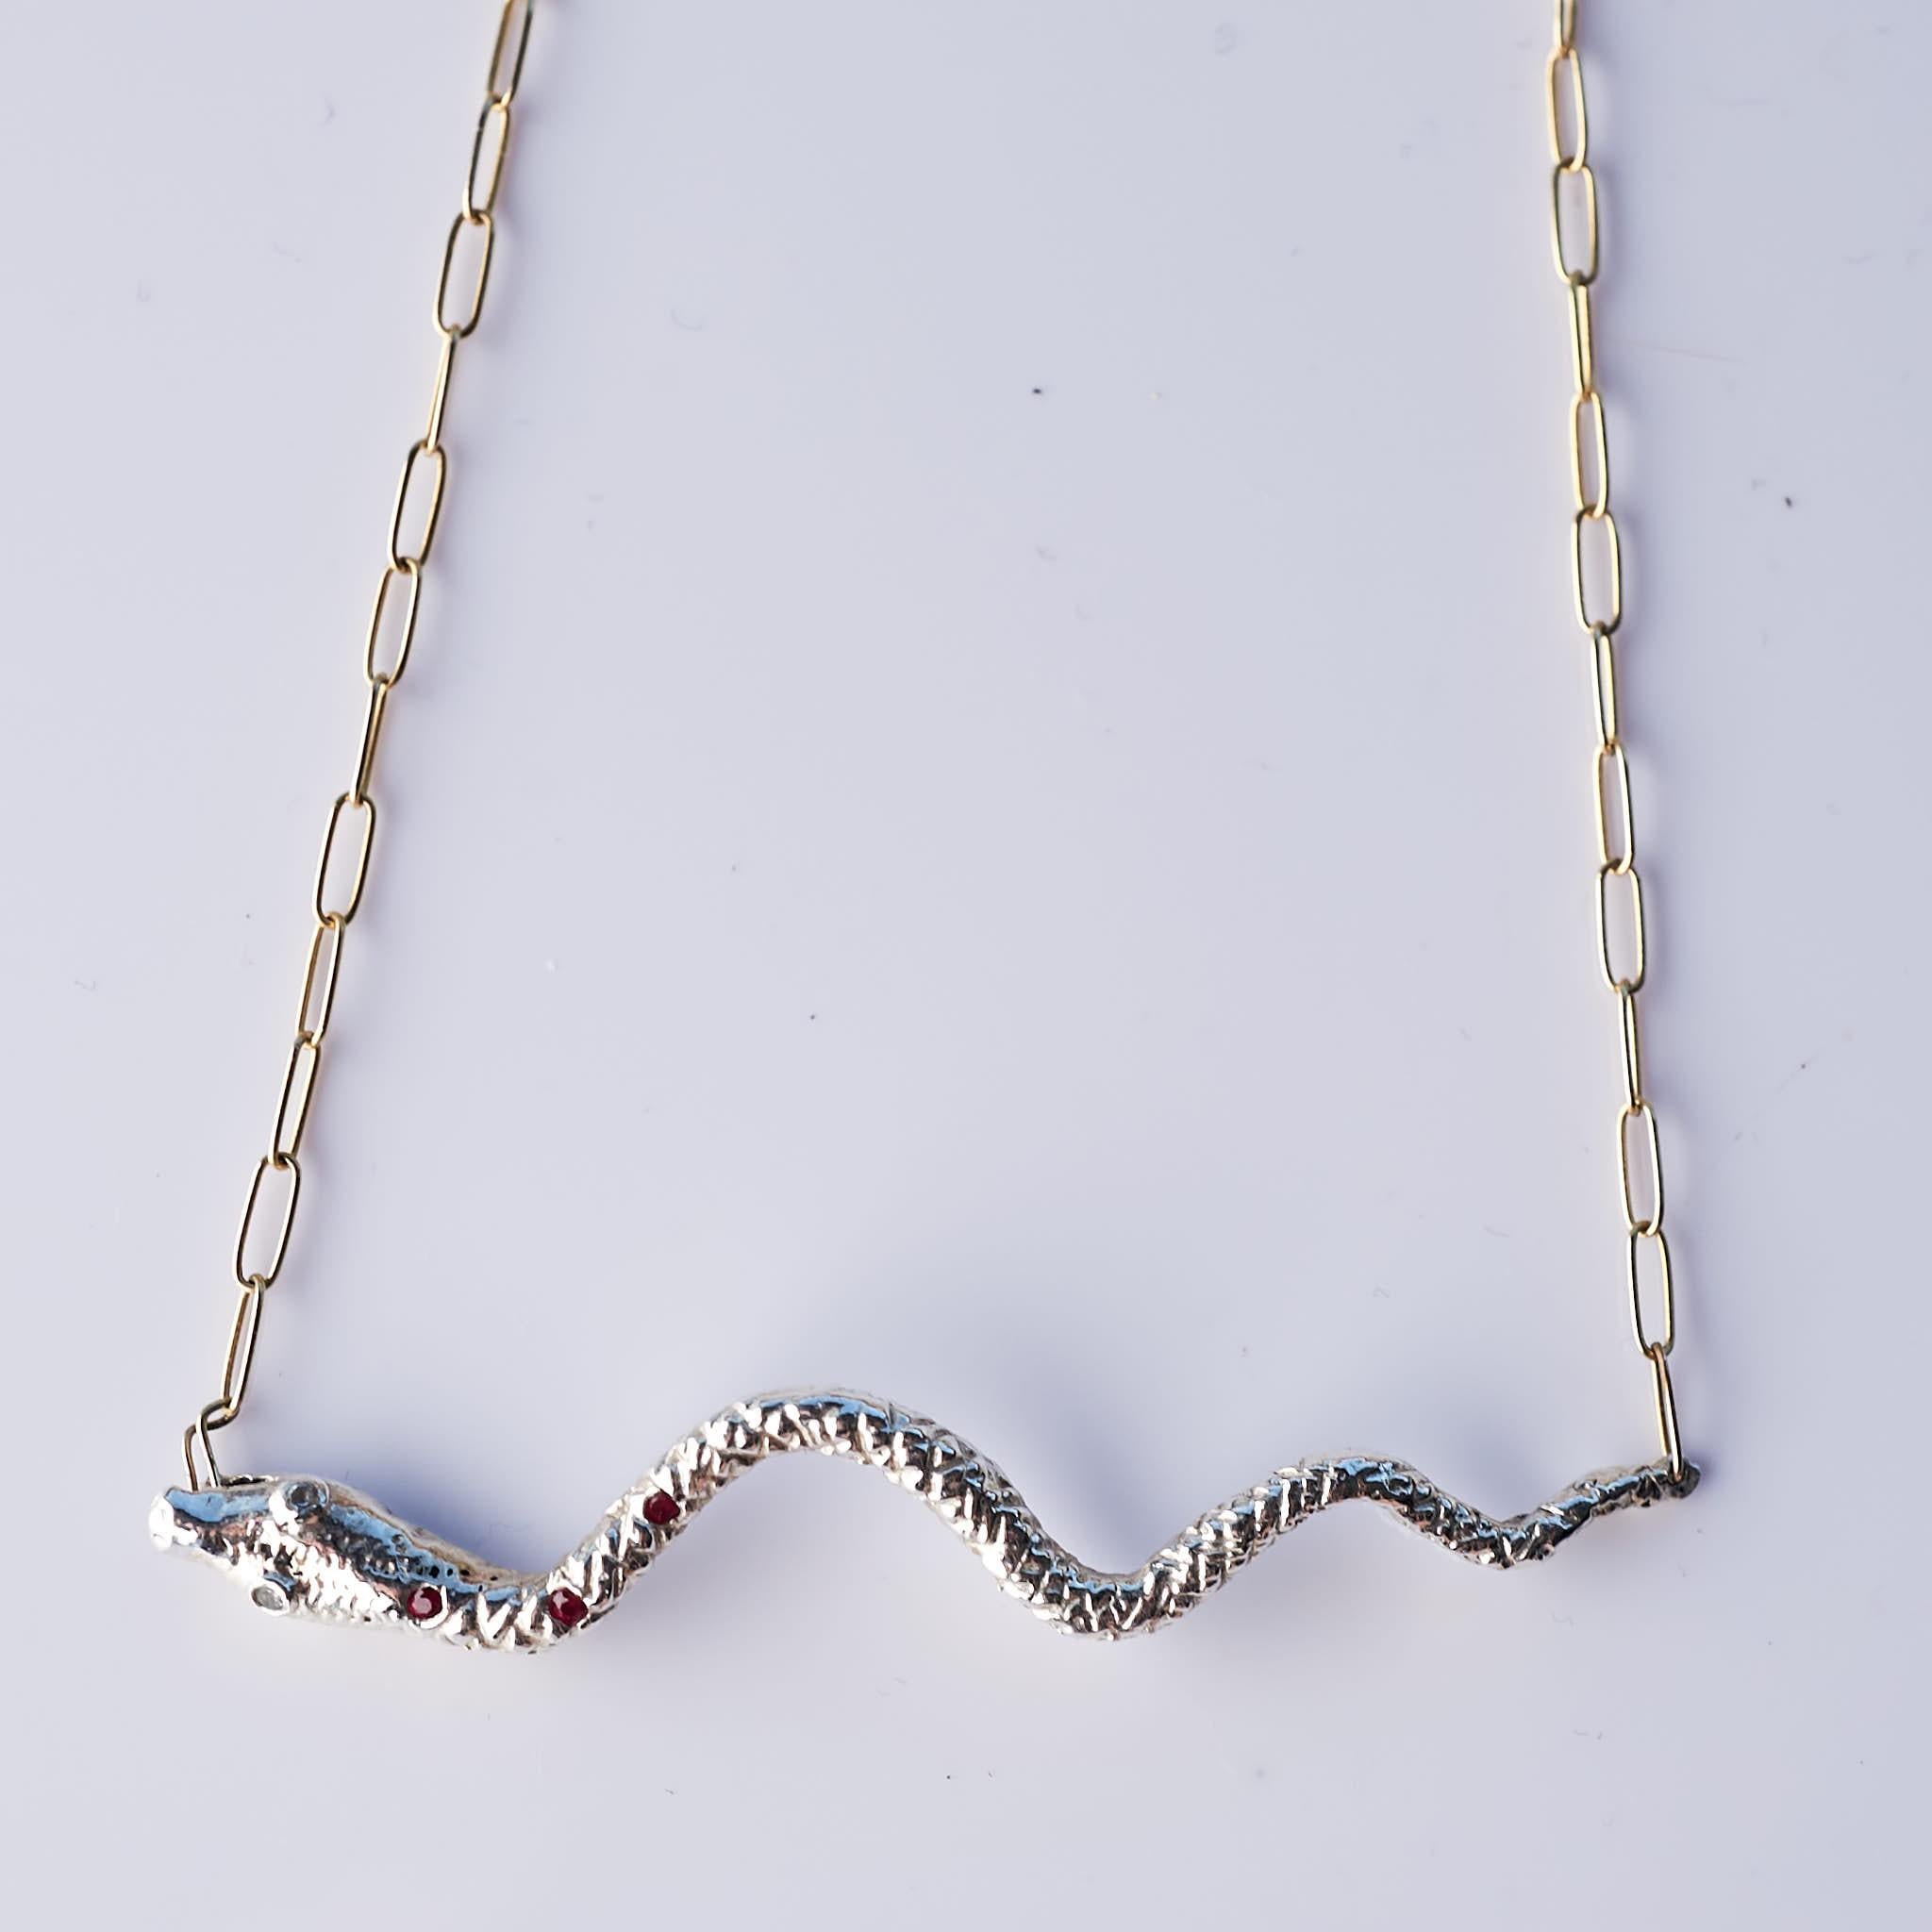 Contemporary Snake Necklace Ruby Aquamarine Choker Chain Silver J Dauphin For Sale